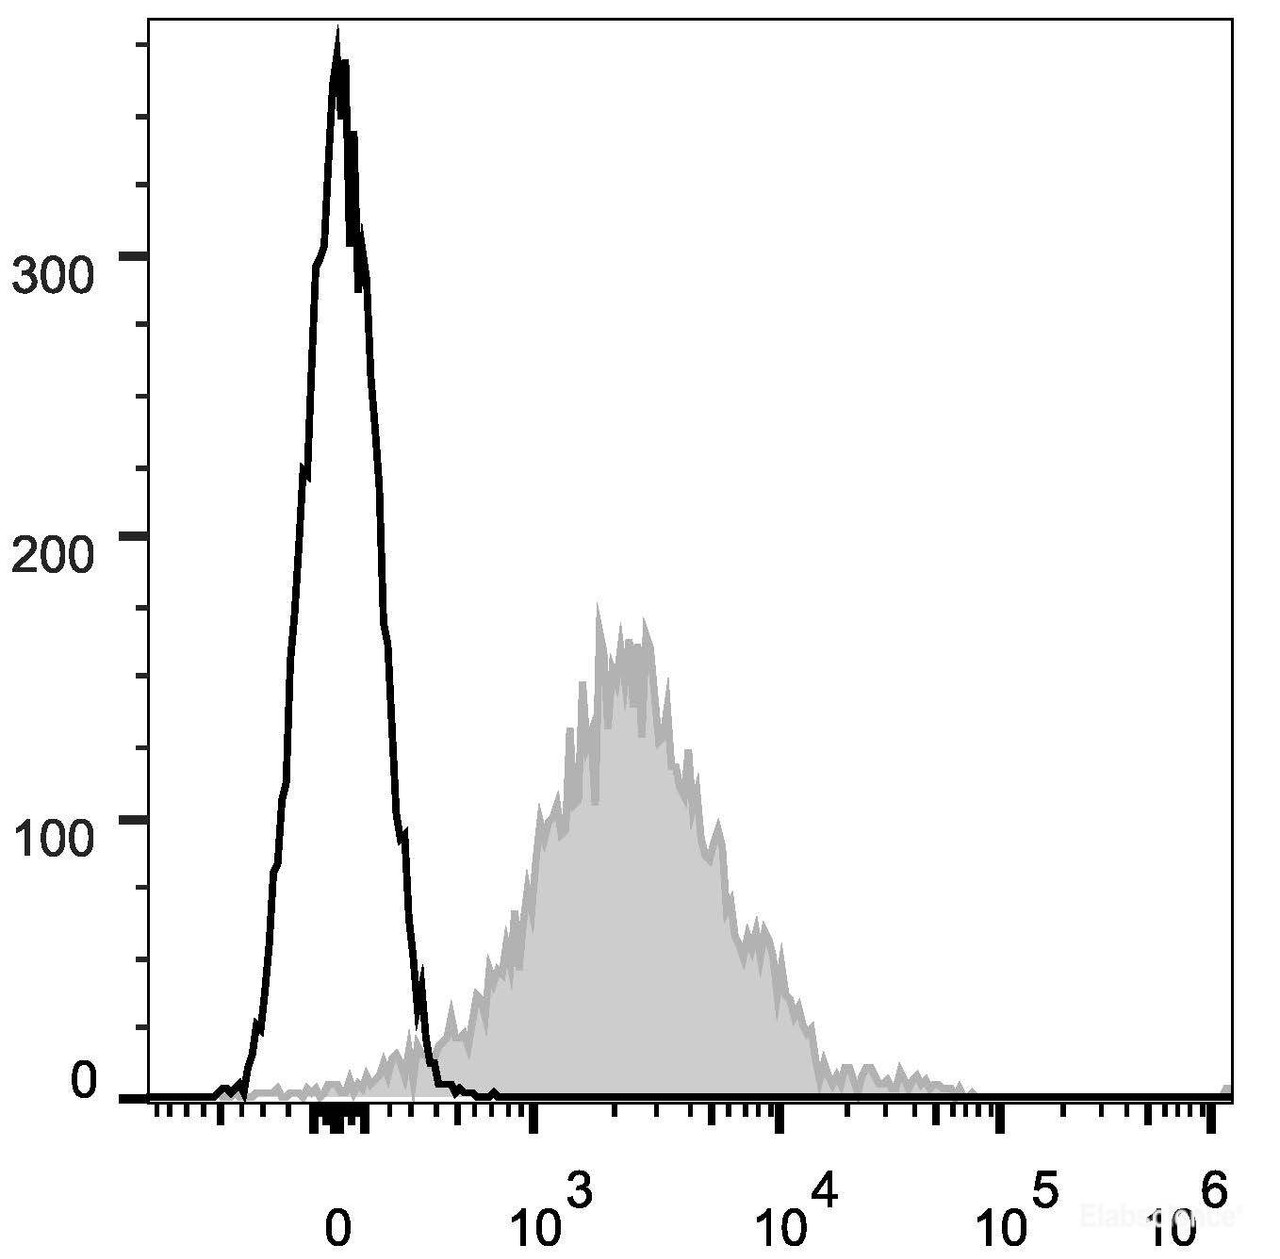 C57BL/6 murine splenocytes are stained with APC Anti-Mouse CD1d Antibody[Used at .2 μg/1<sup>6</sup> cells dilution](filled gray histogram). Unstained splenocytes (empty black histogram) are used as control.